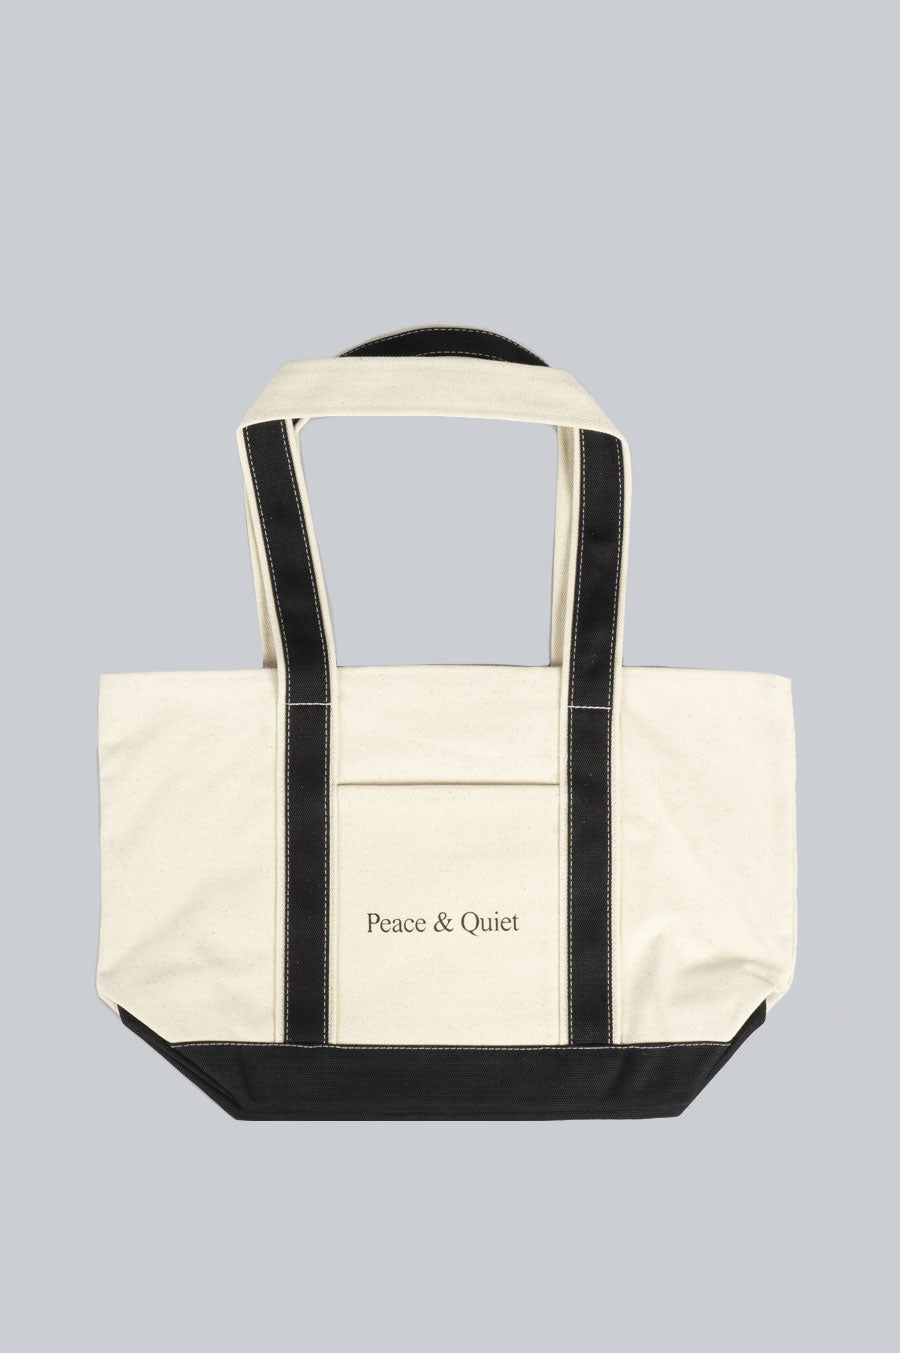 MUSEUM OF PEACE AND QUIET WORDMARK BOAT TOTE BAG BLACK NATURAL